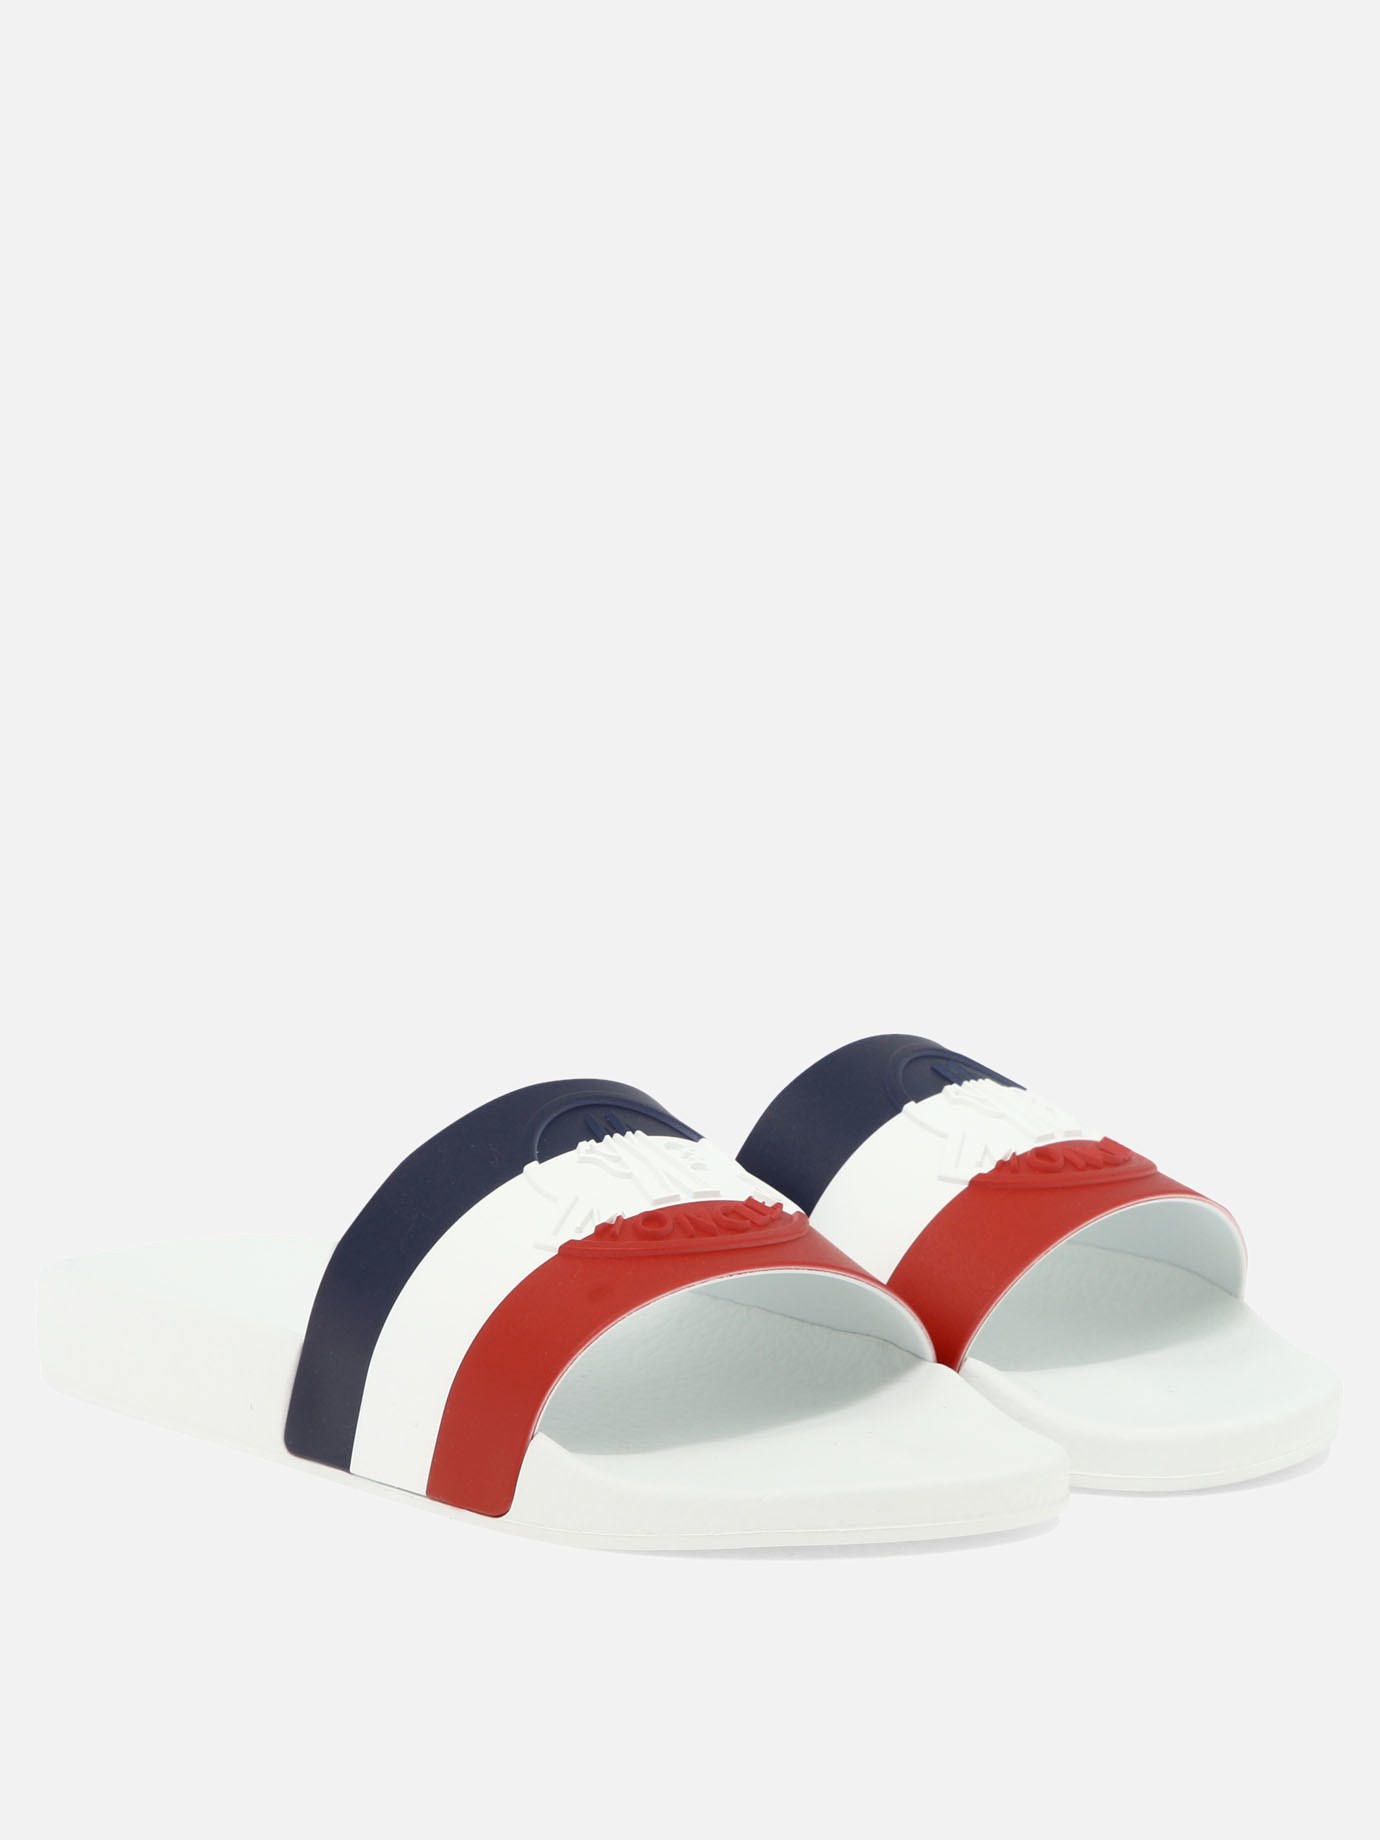  Basile  sandals by Moncler